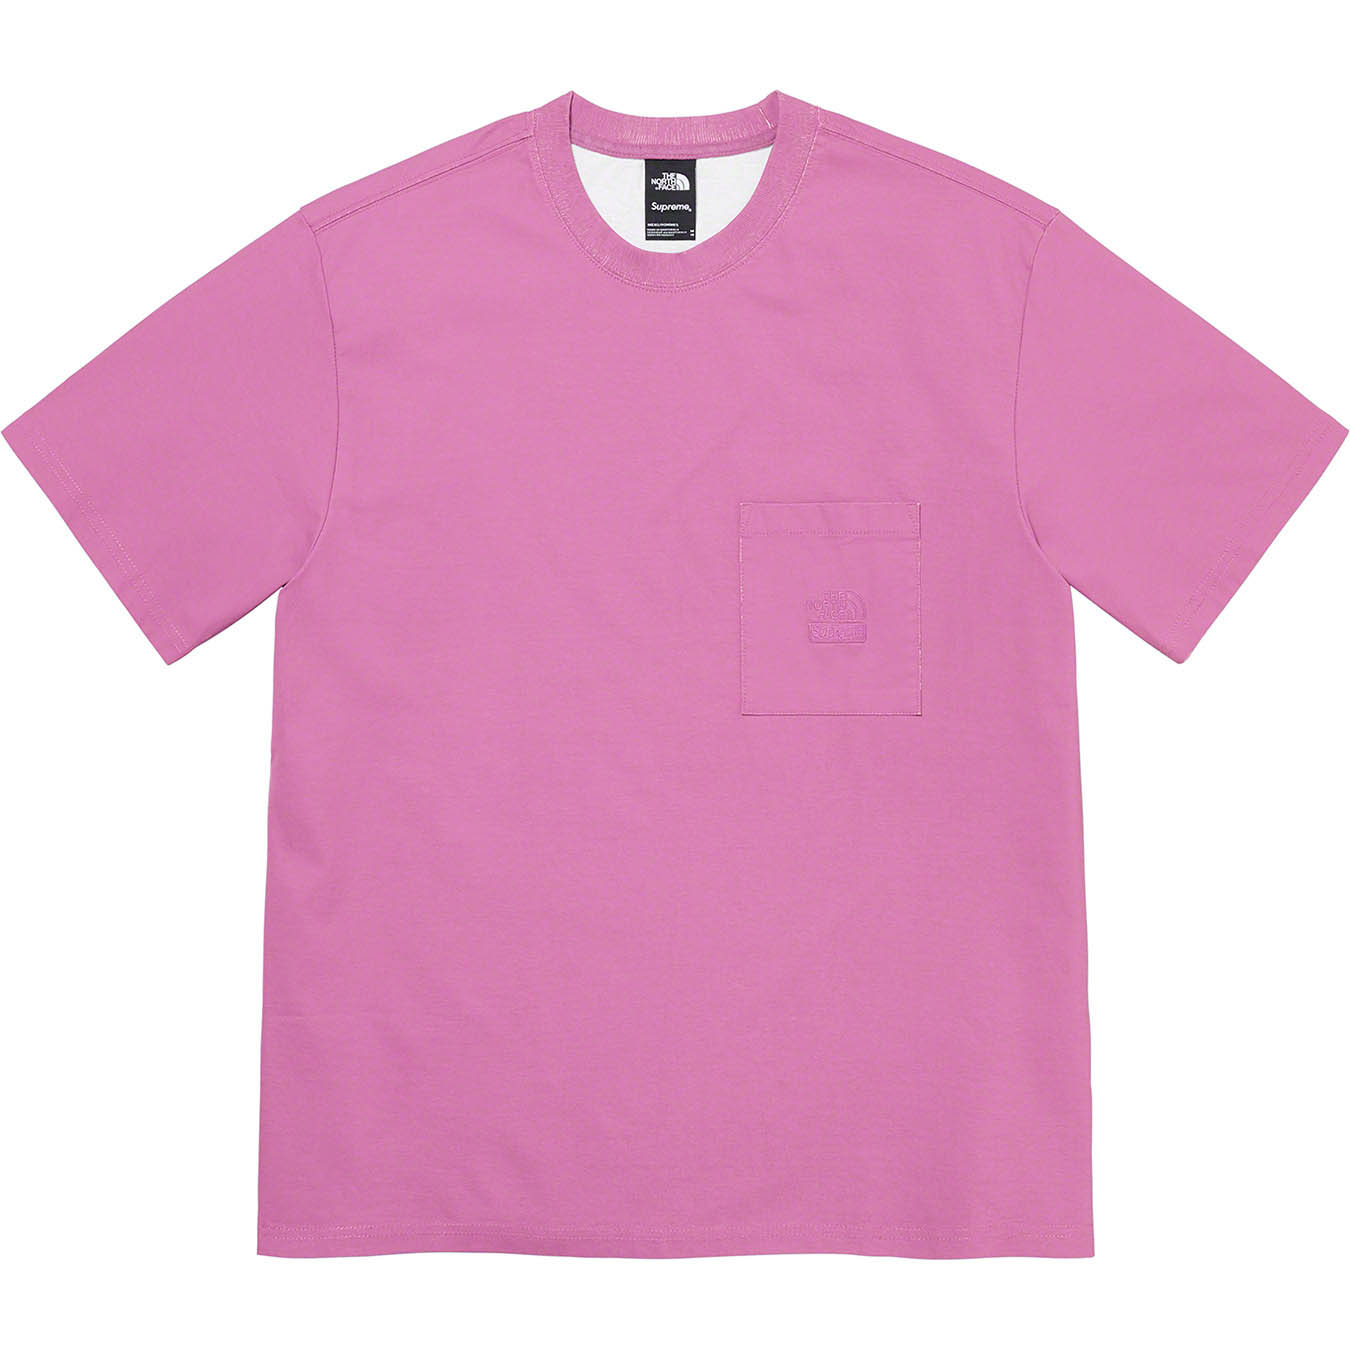 Supreme®/The North Face® Pigment Printed Pocket Tee